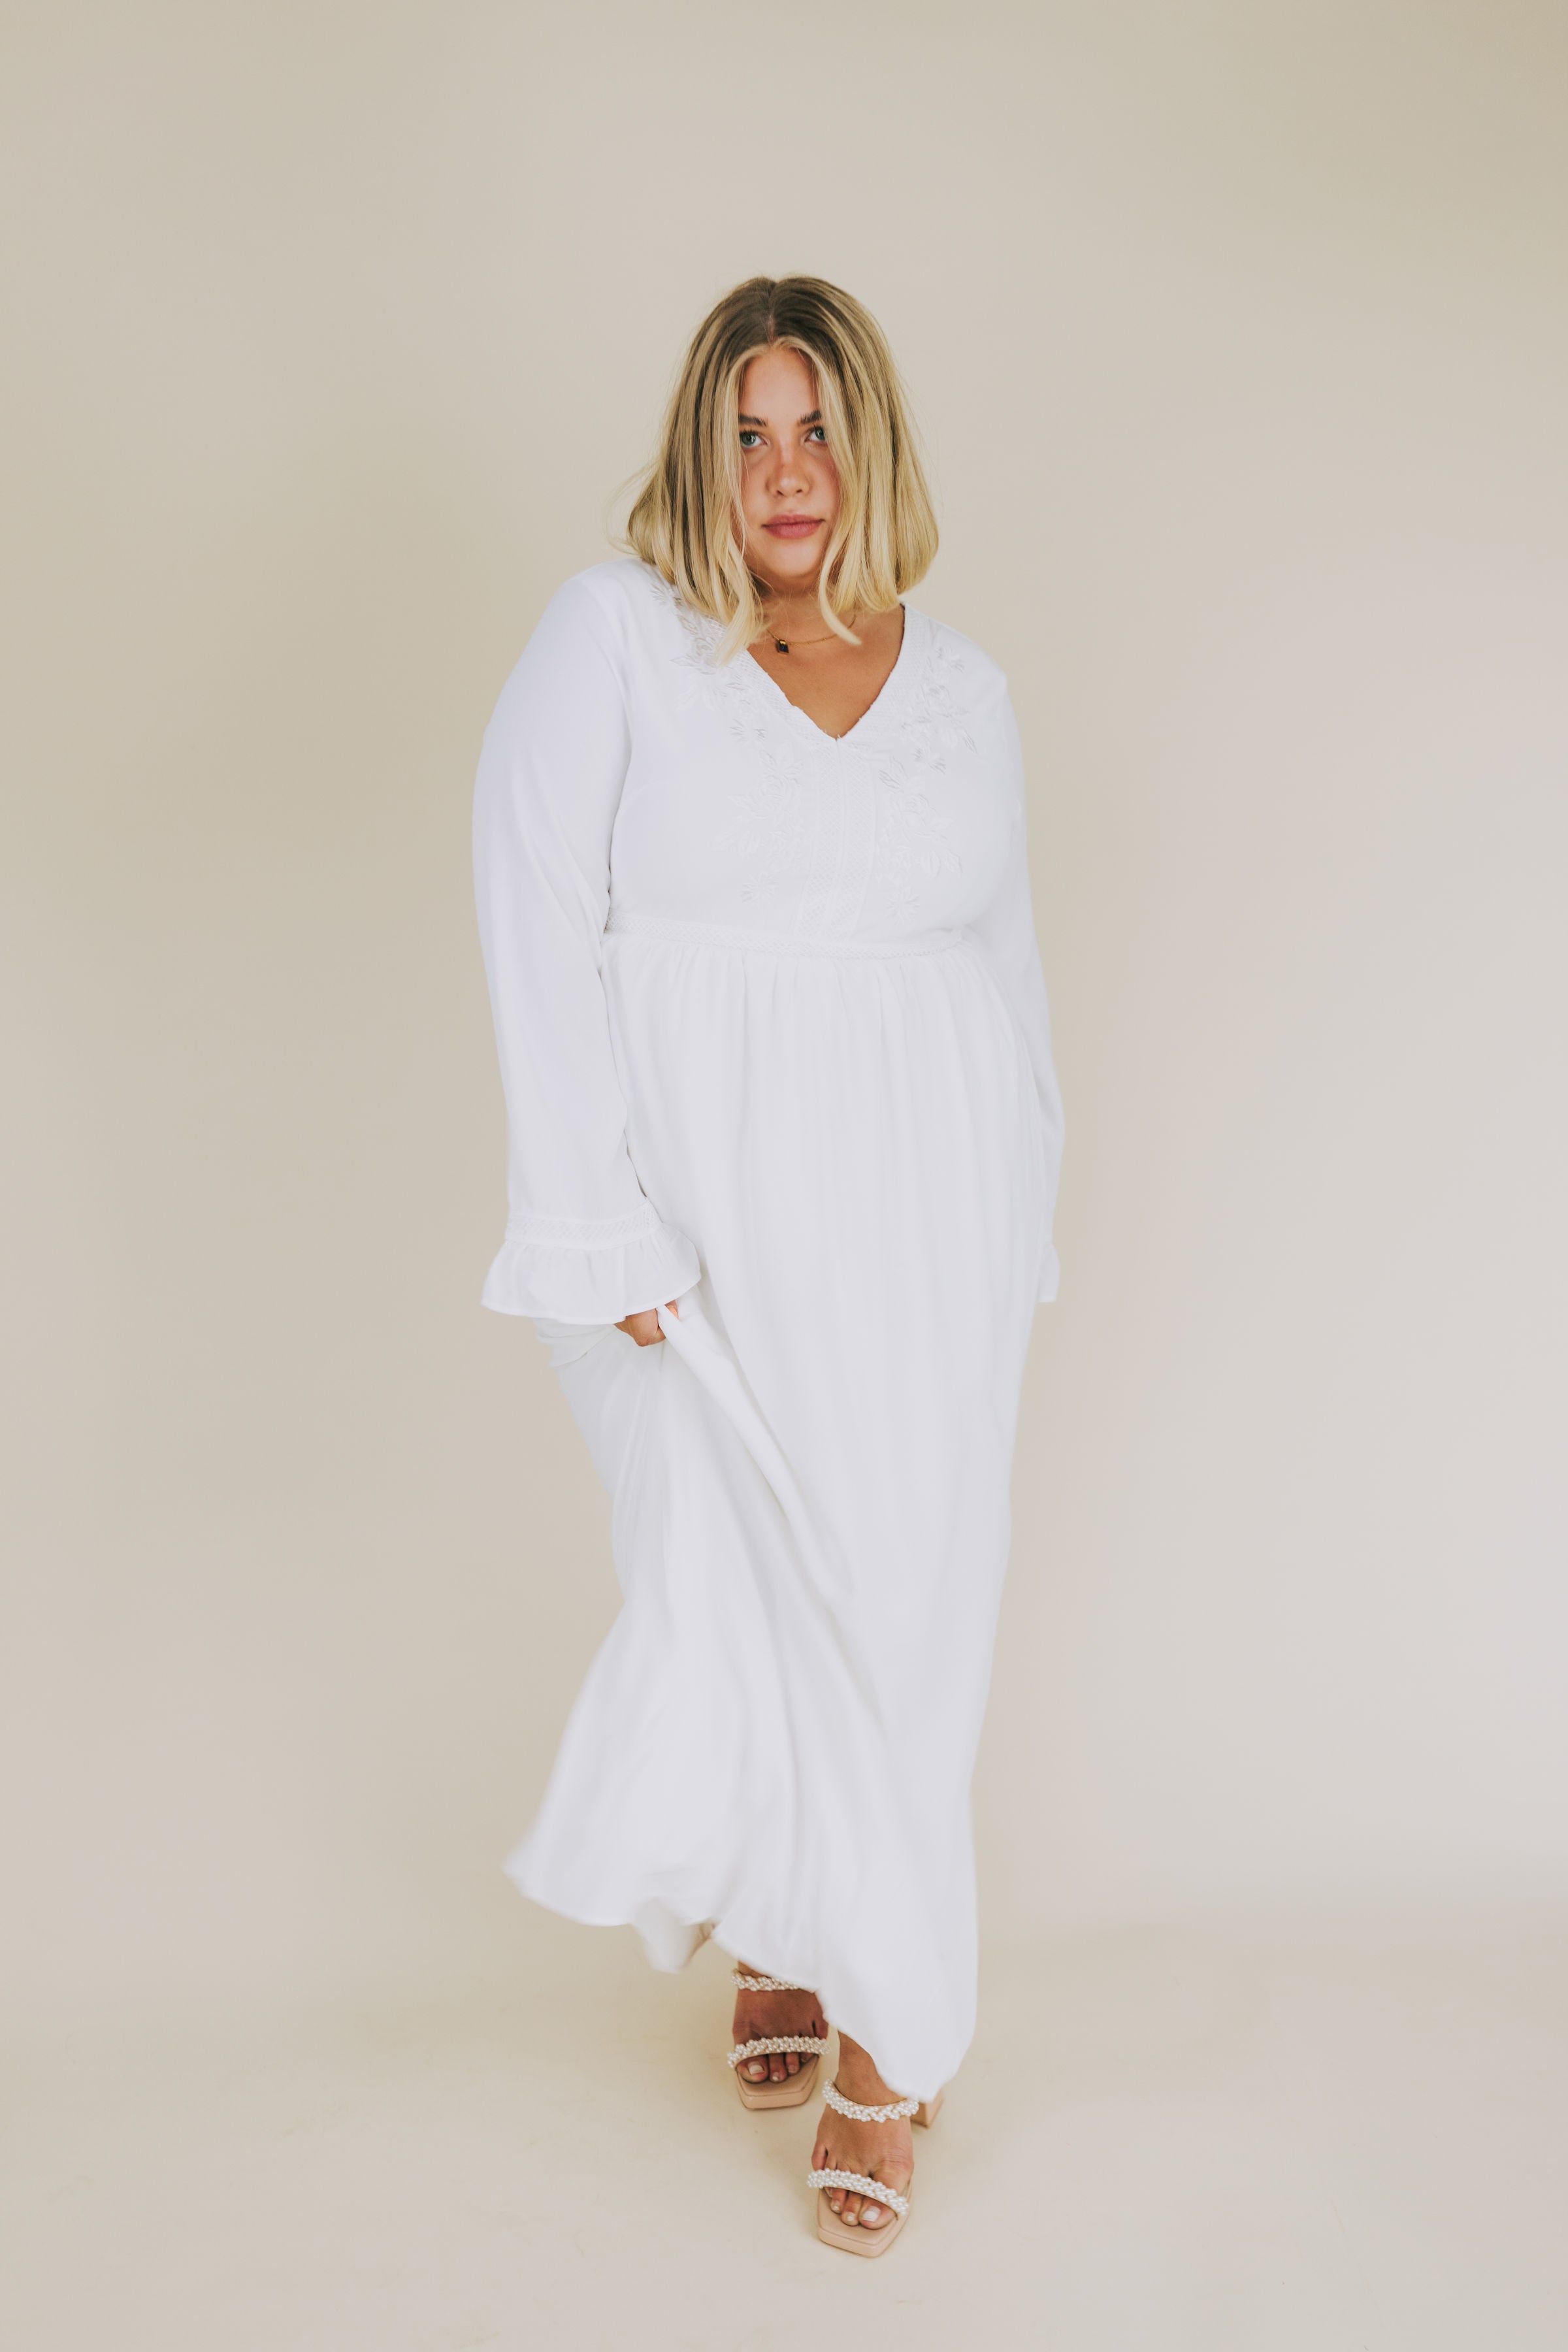 EXCLUSIVE - The White: Norma